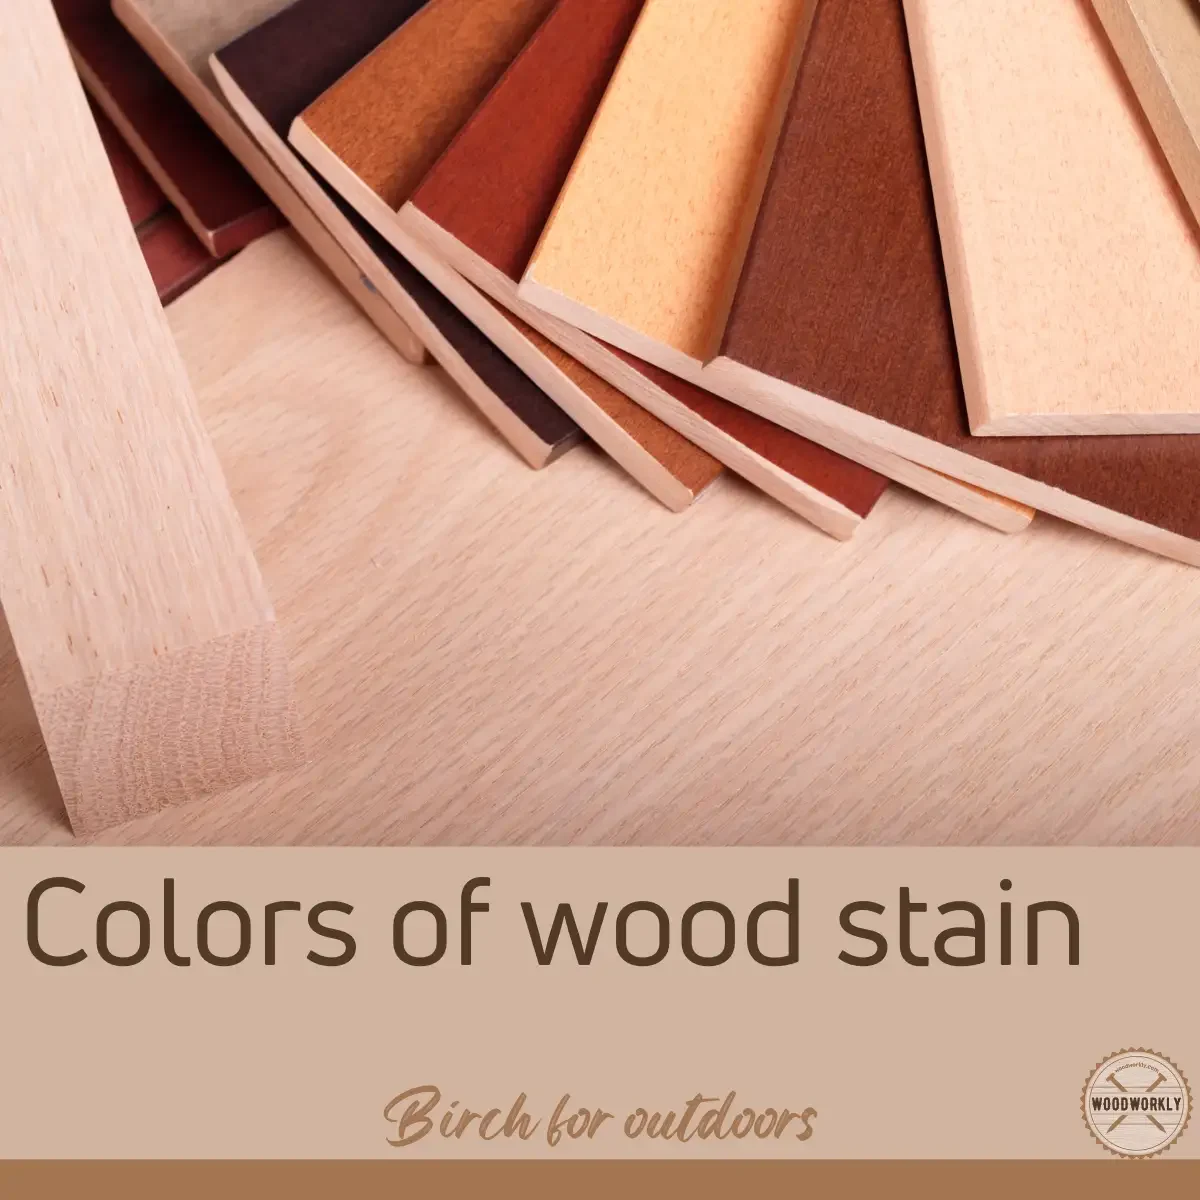 Colors of wood stain